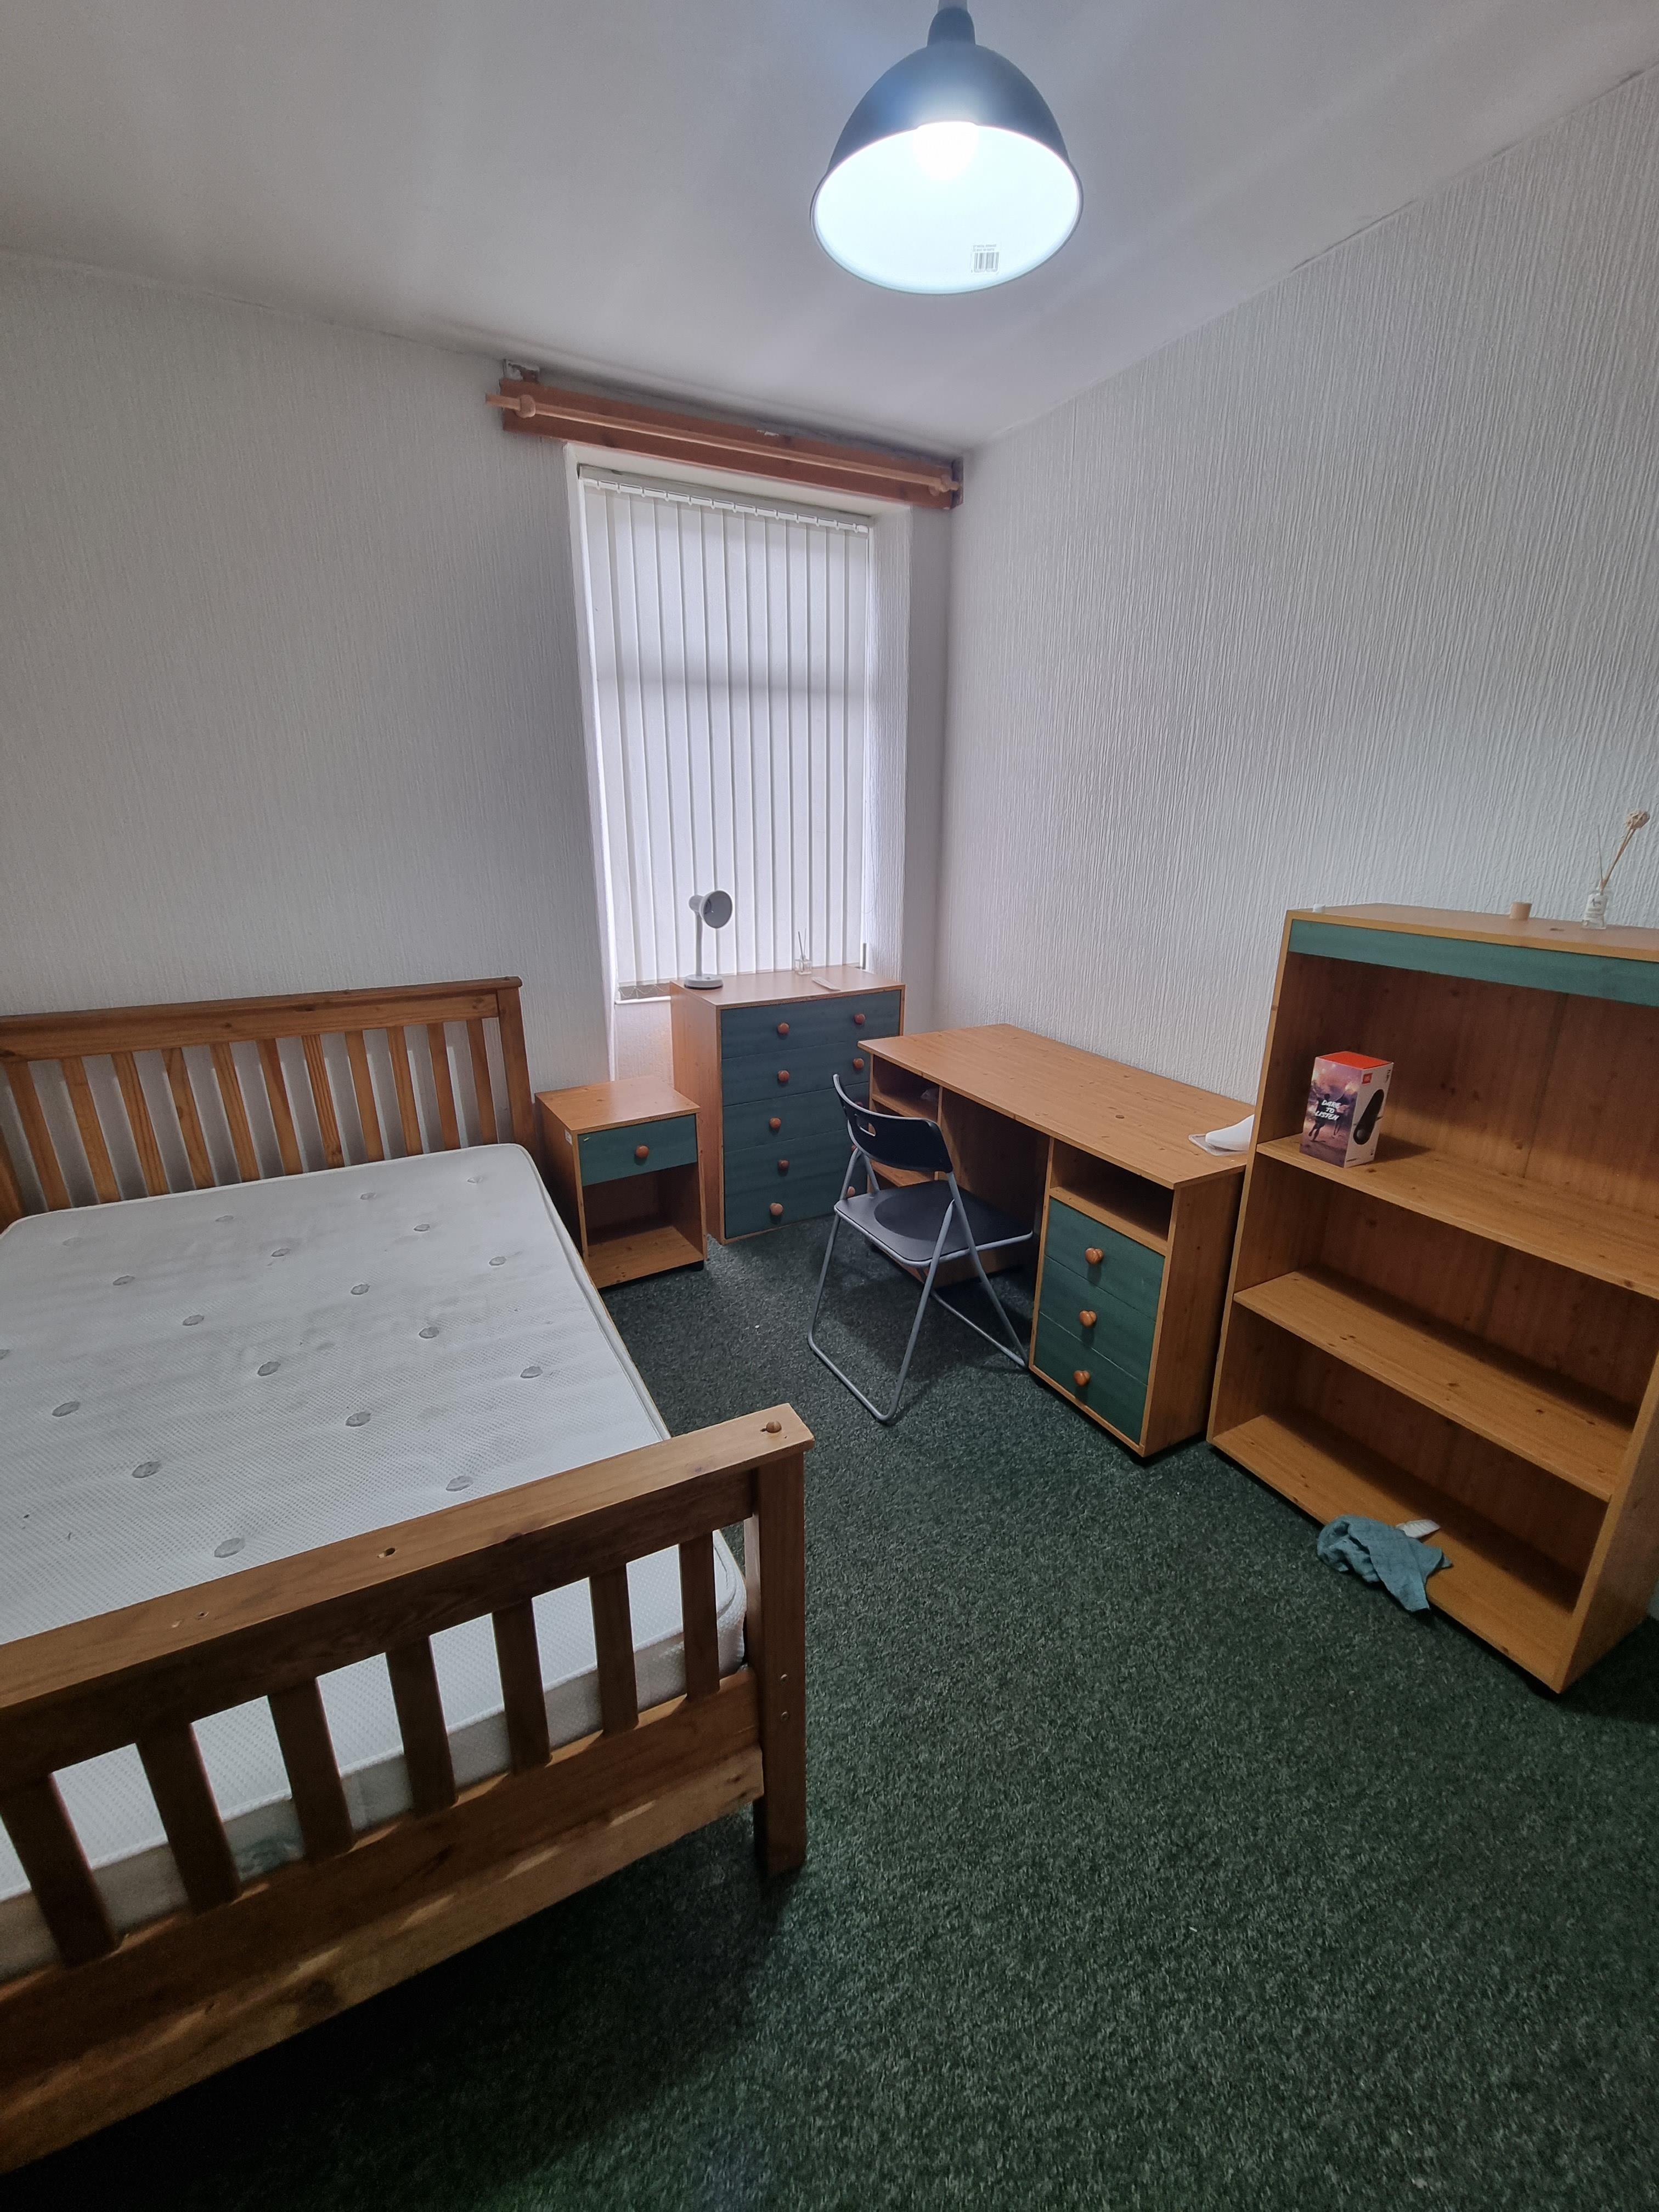 1 bed house / flat share to rent in Wood Road , Treforest  5